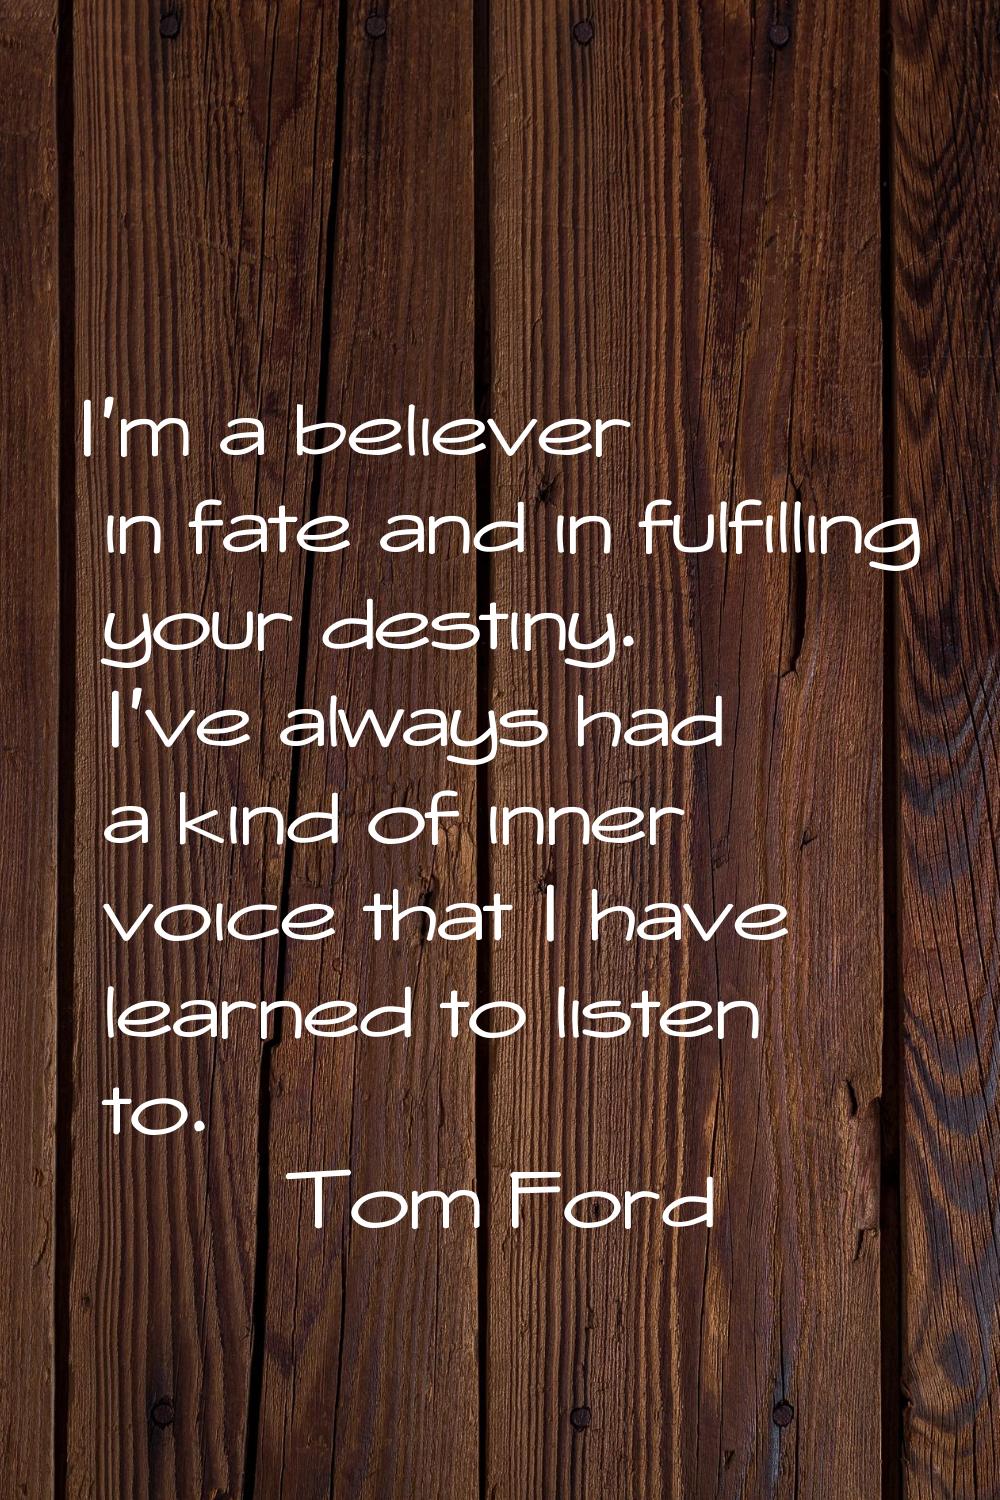 I'm a believer in fate and in fulfilling your destiny. I've always had a kind of inner voice that I